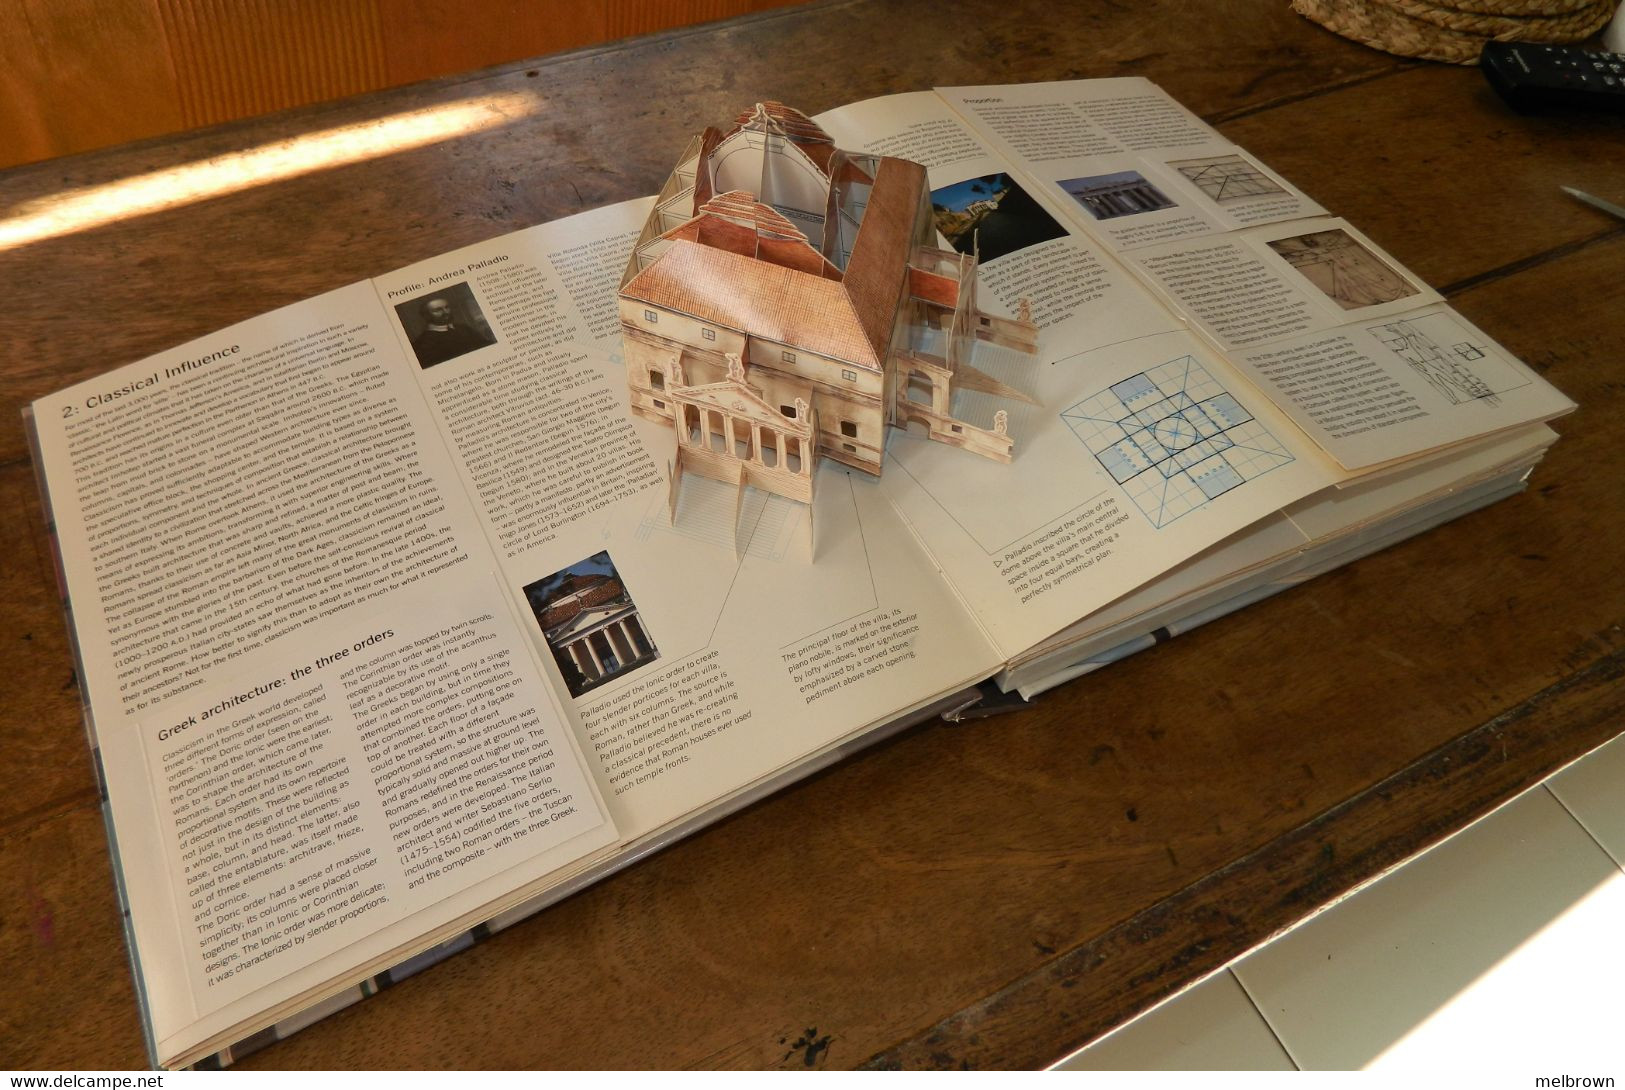 THE ARCHITECTURE PACK - A 3D POP UP COLLECTIBLE BOOK - Architettura/ Design